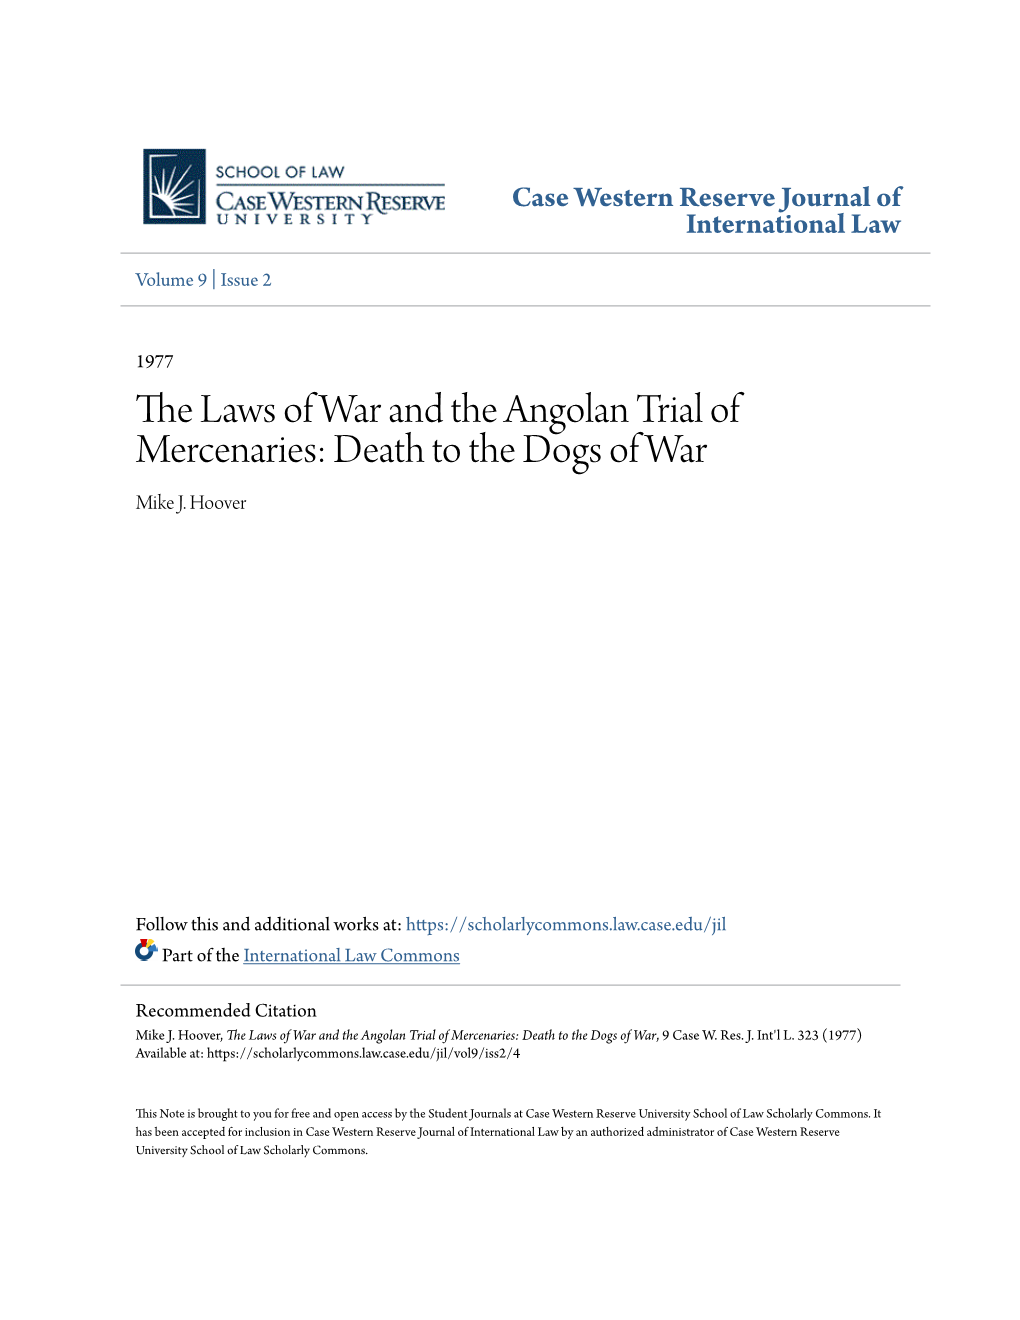 The Laws of War and the Angolan Trial of Mercenaries: Death to the Dogs of War Mike J